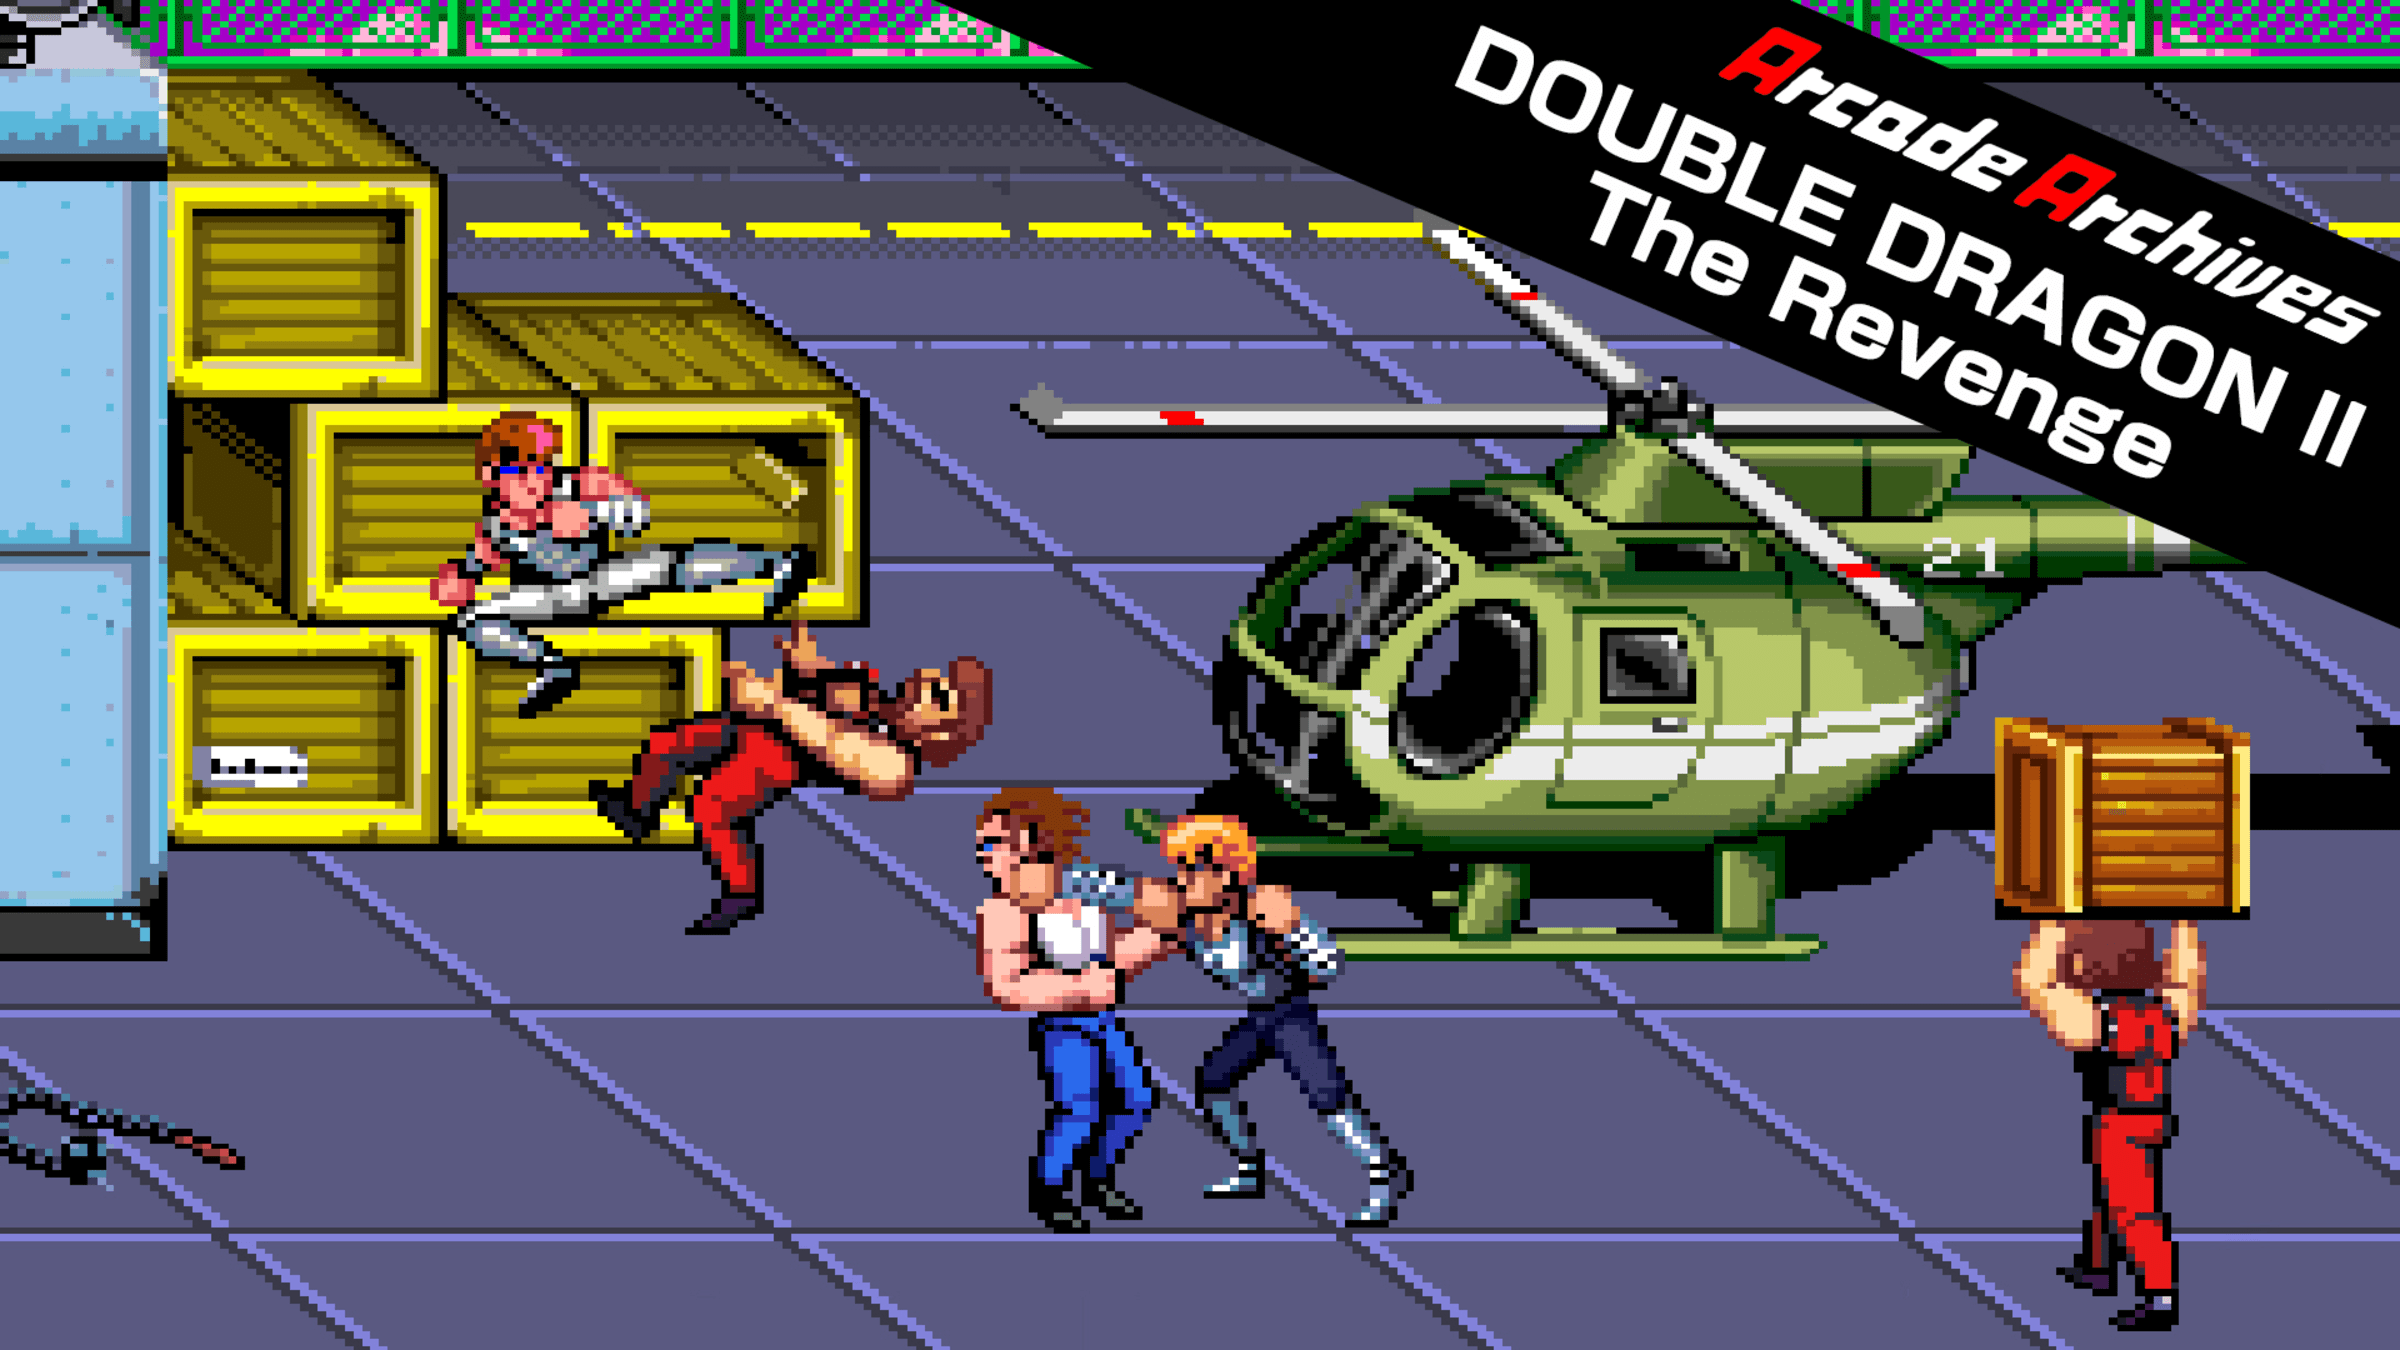 Arcade Archives DOUBLE DRAGON - Nintendo Switch Game  PlayLikeScrooge  tracks over 6000 nintendo switch games